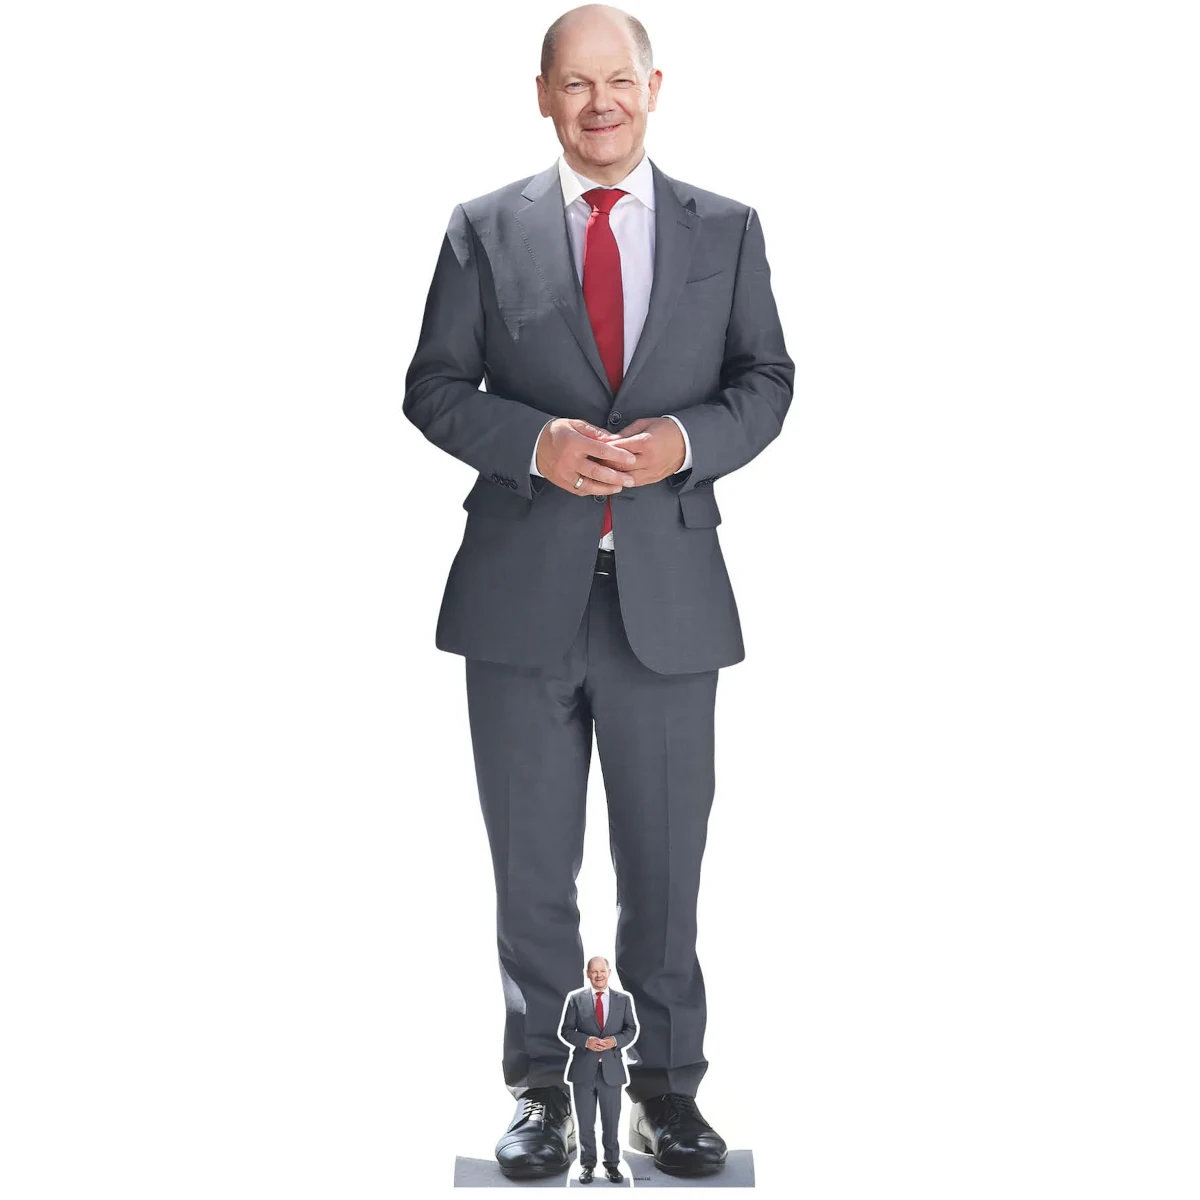 SC4075 Olaf Scholz (German Chancellor) Lifesize + Mini Cardboard Cutout Standee Front